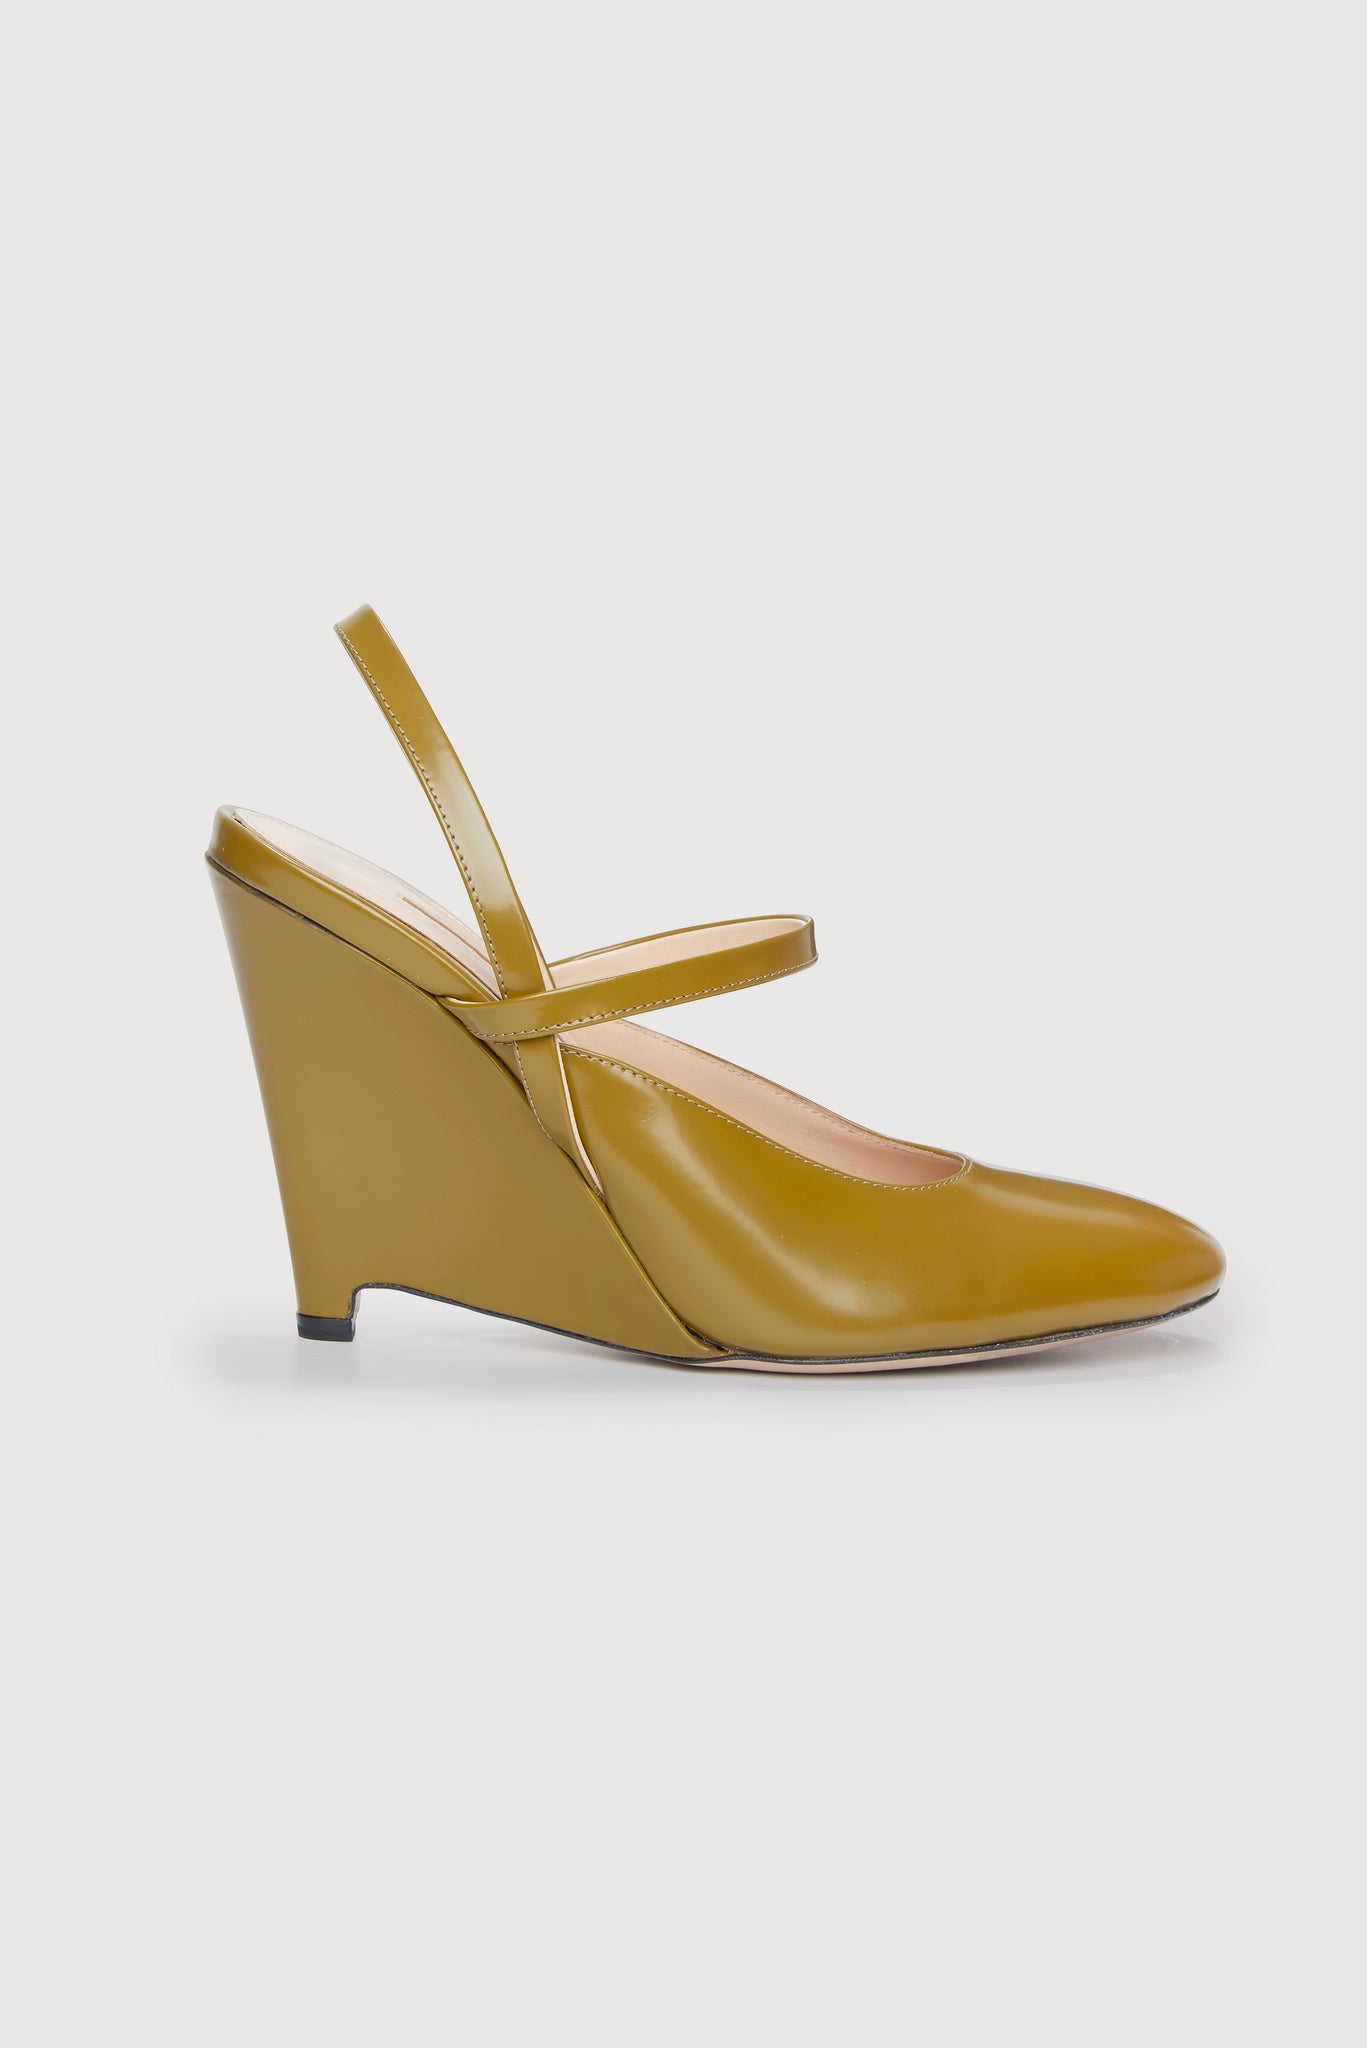 Aster Chartreuse Leather Wedge Shoes | Emilia Wickstead